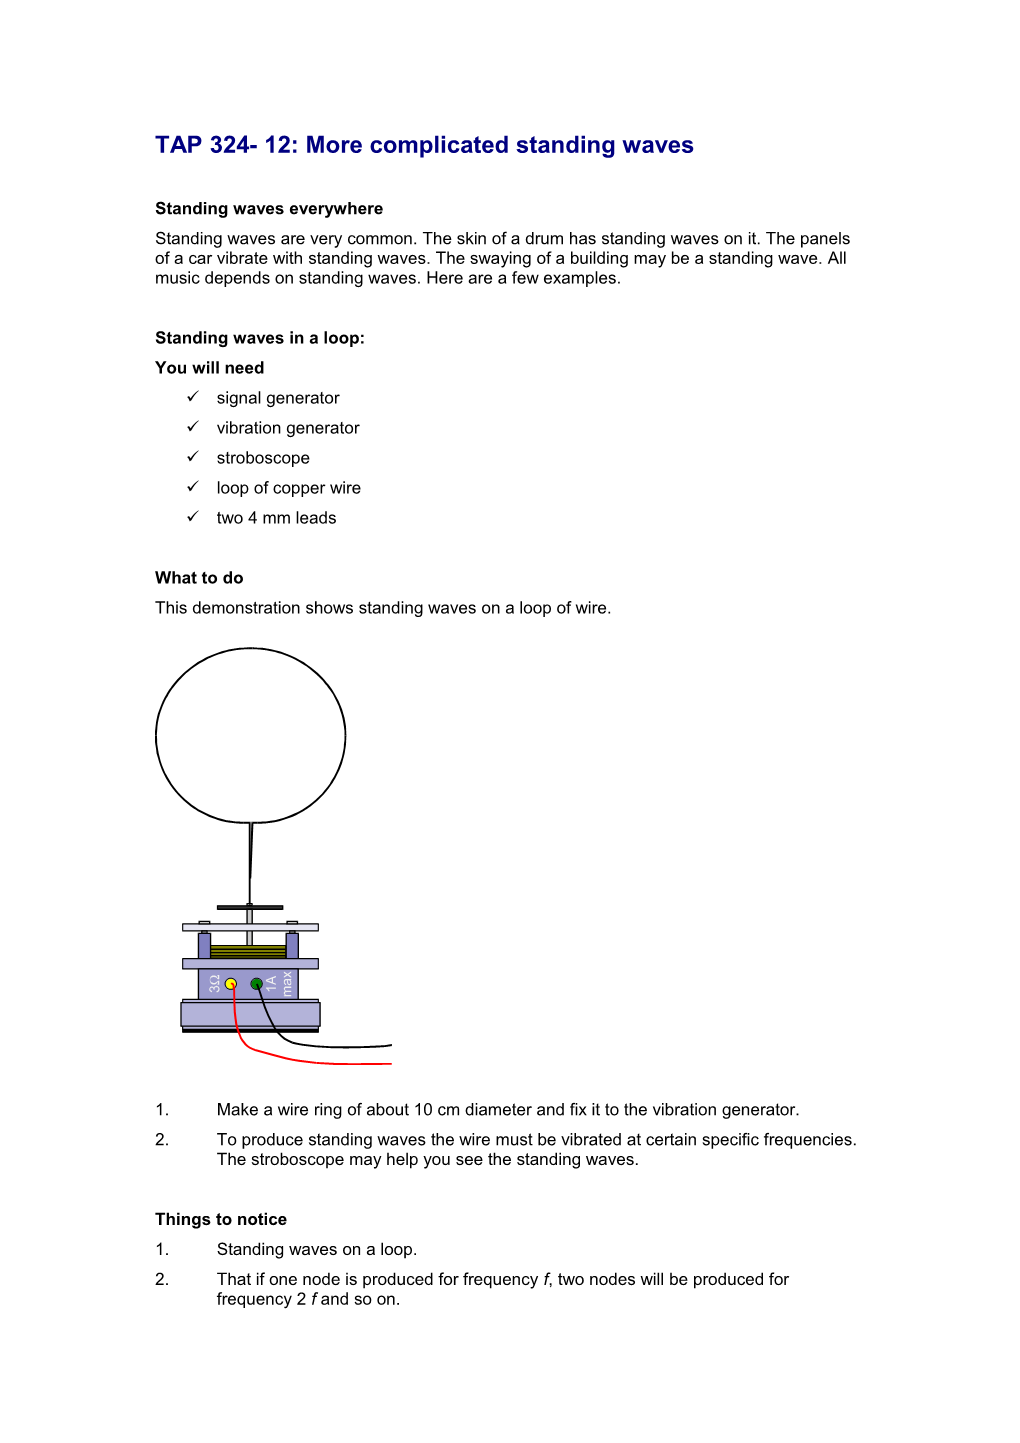 TAP 324- 12: More Complicated Standing Waves